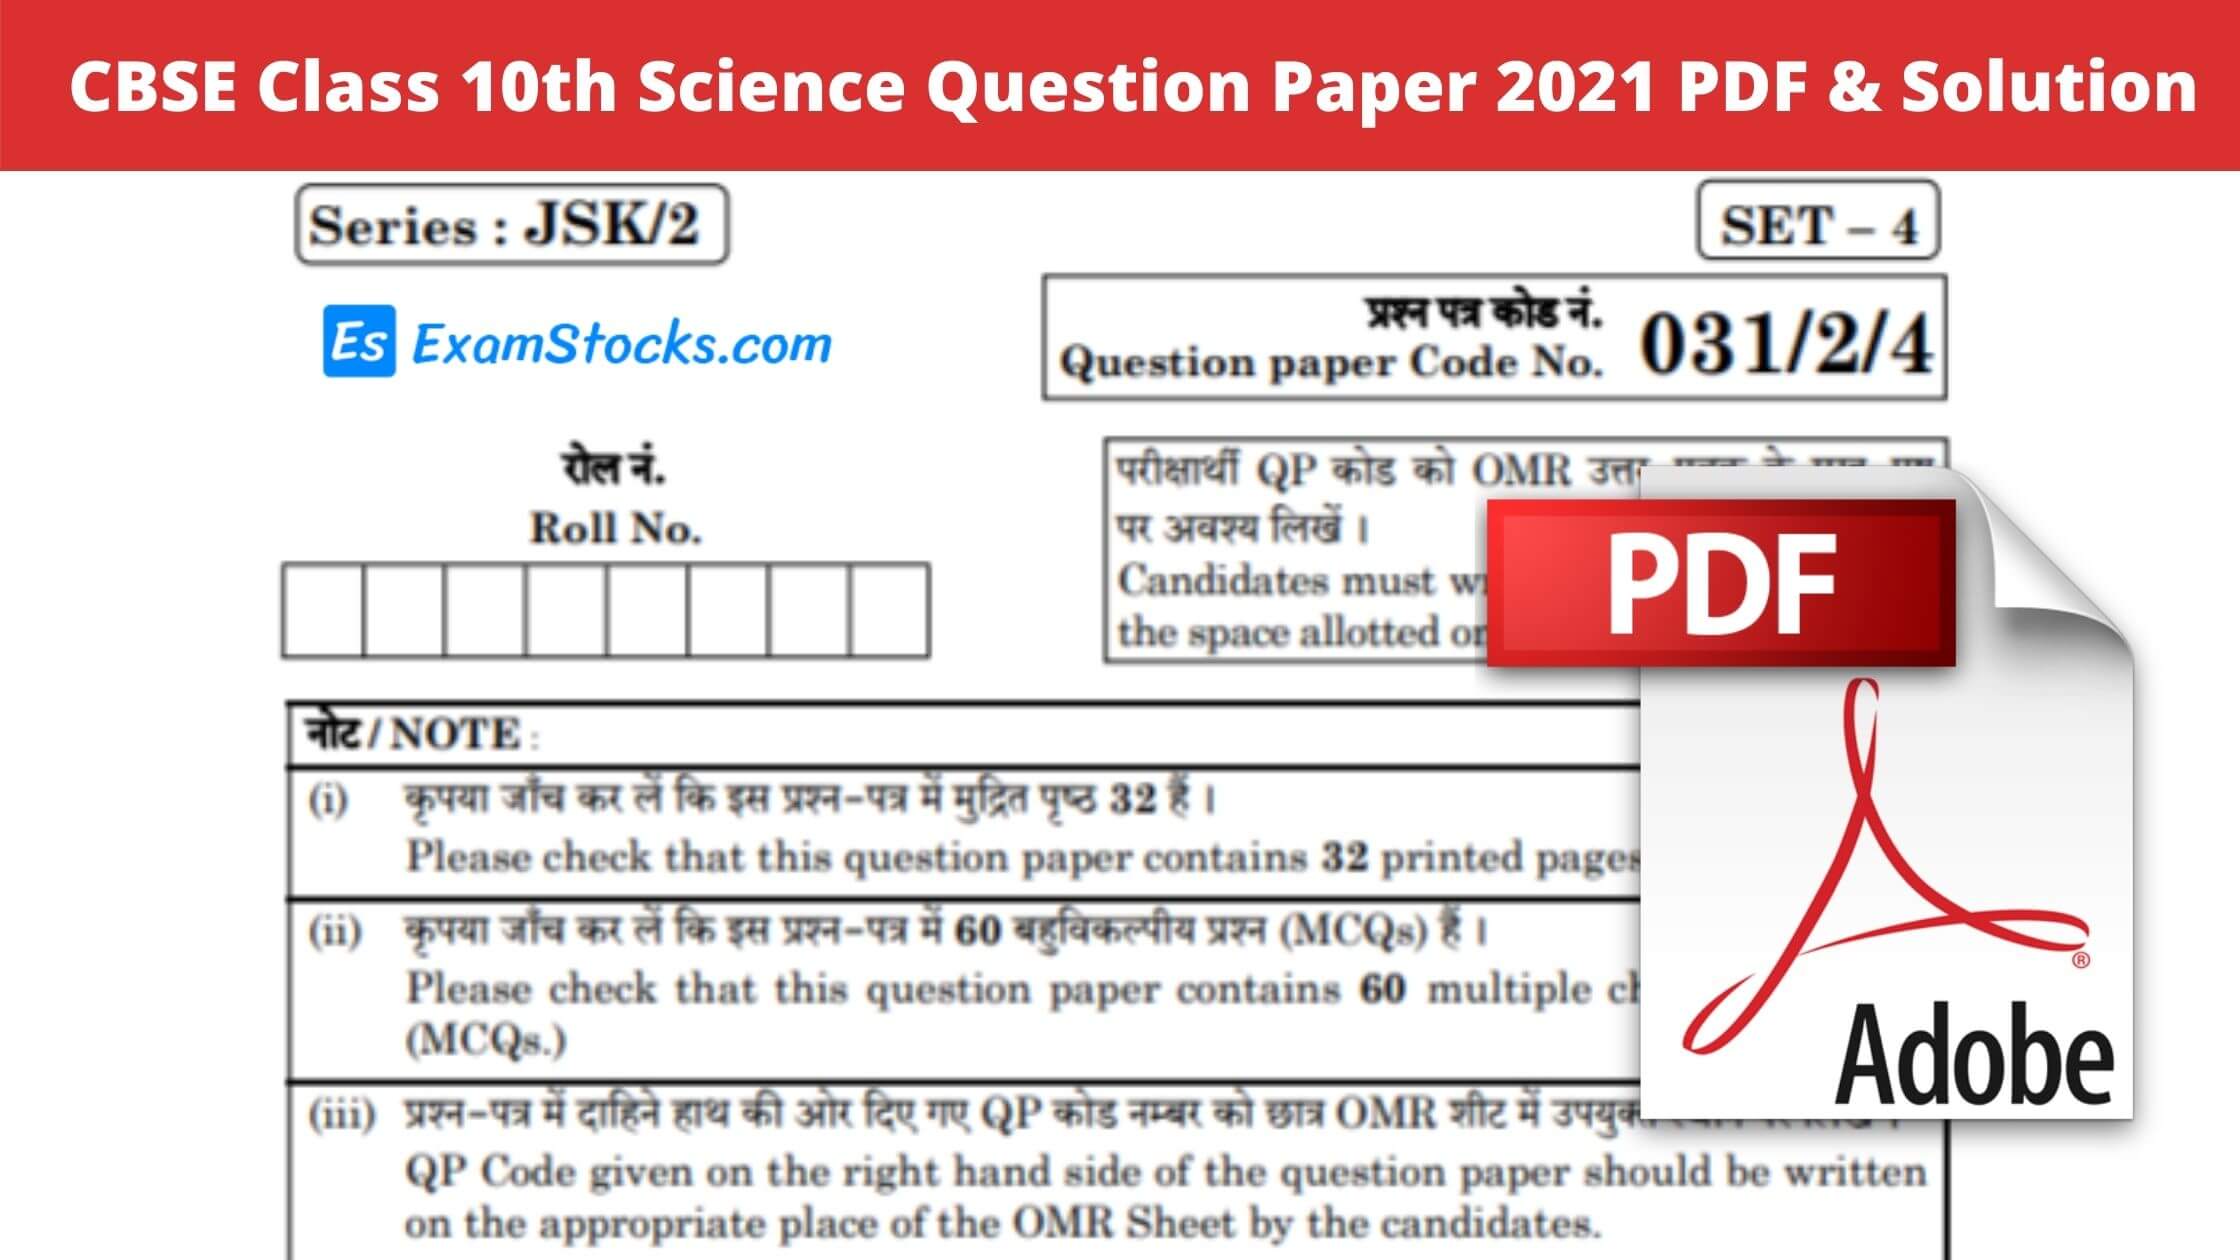 10th class assignment 2021 pdf download